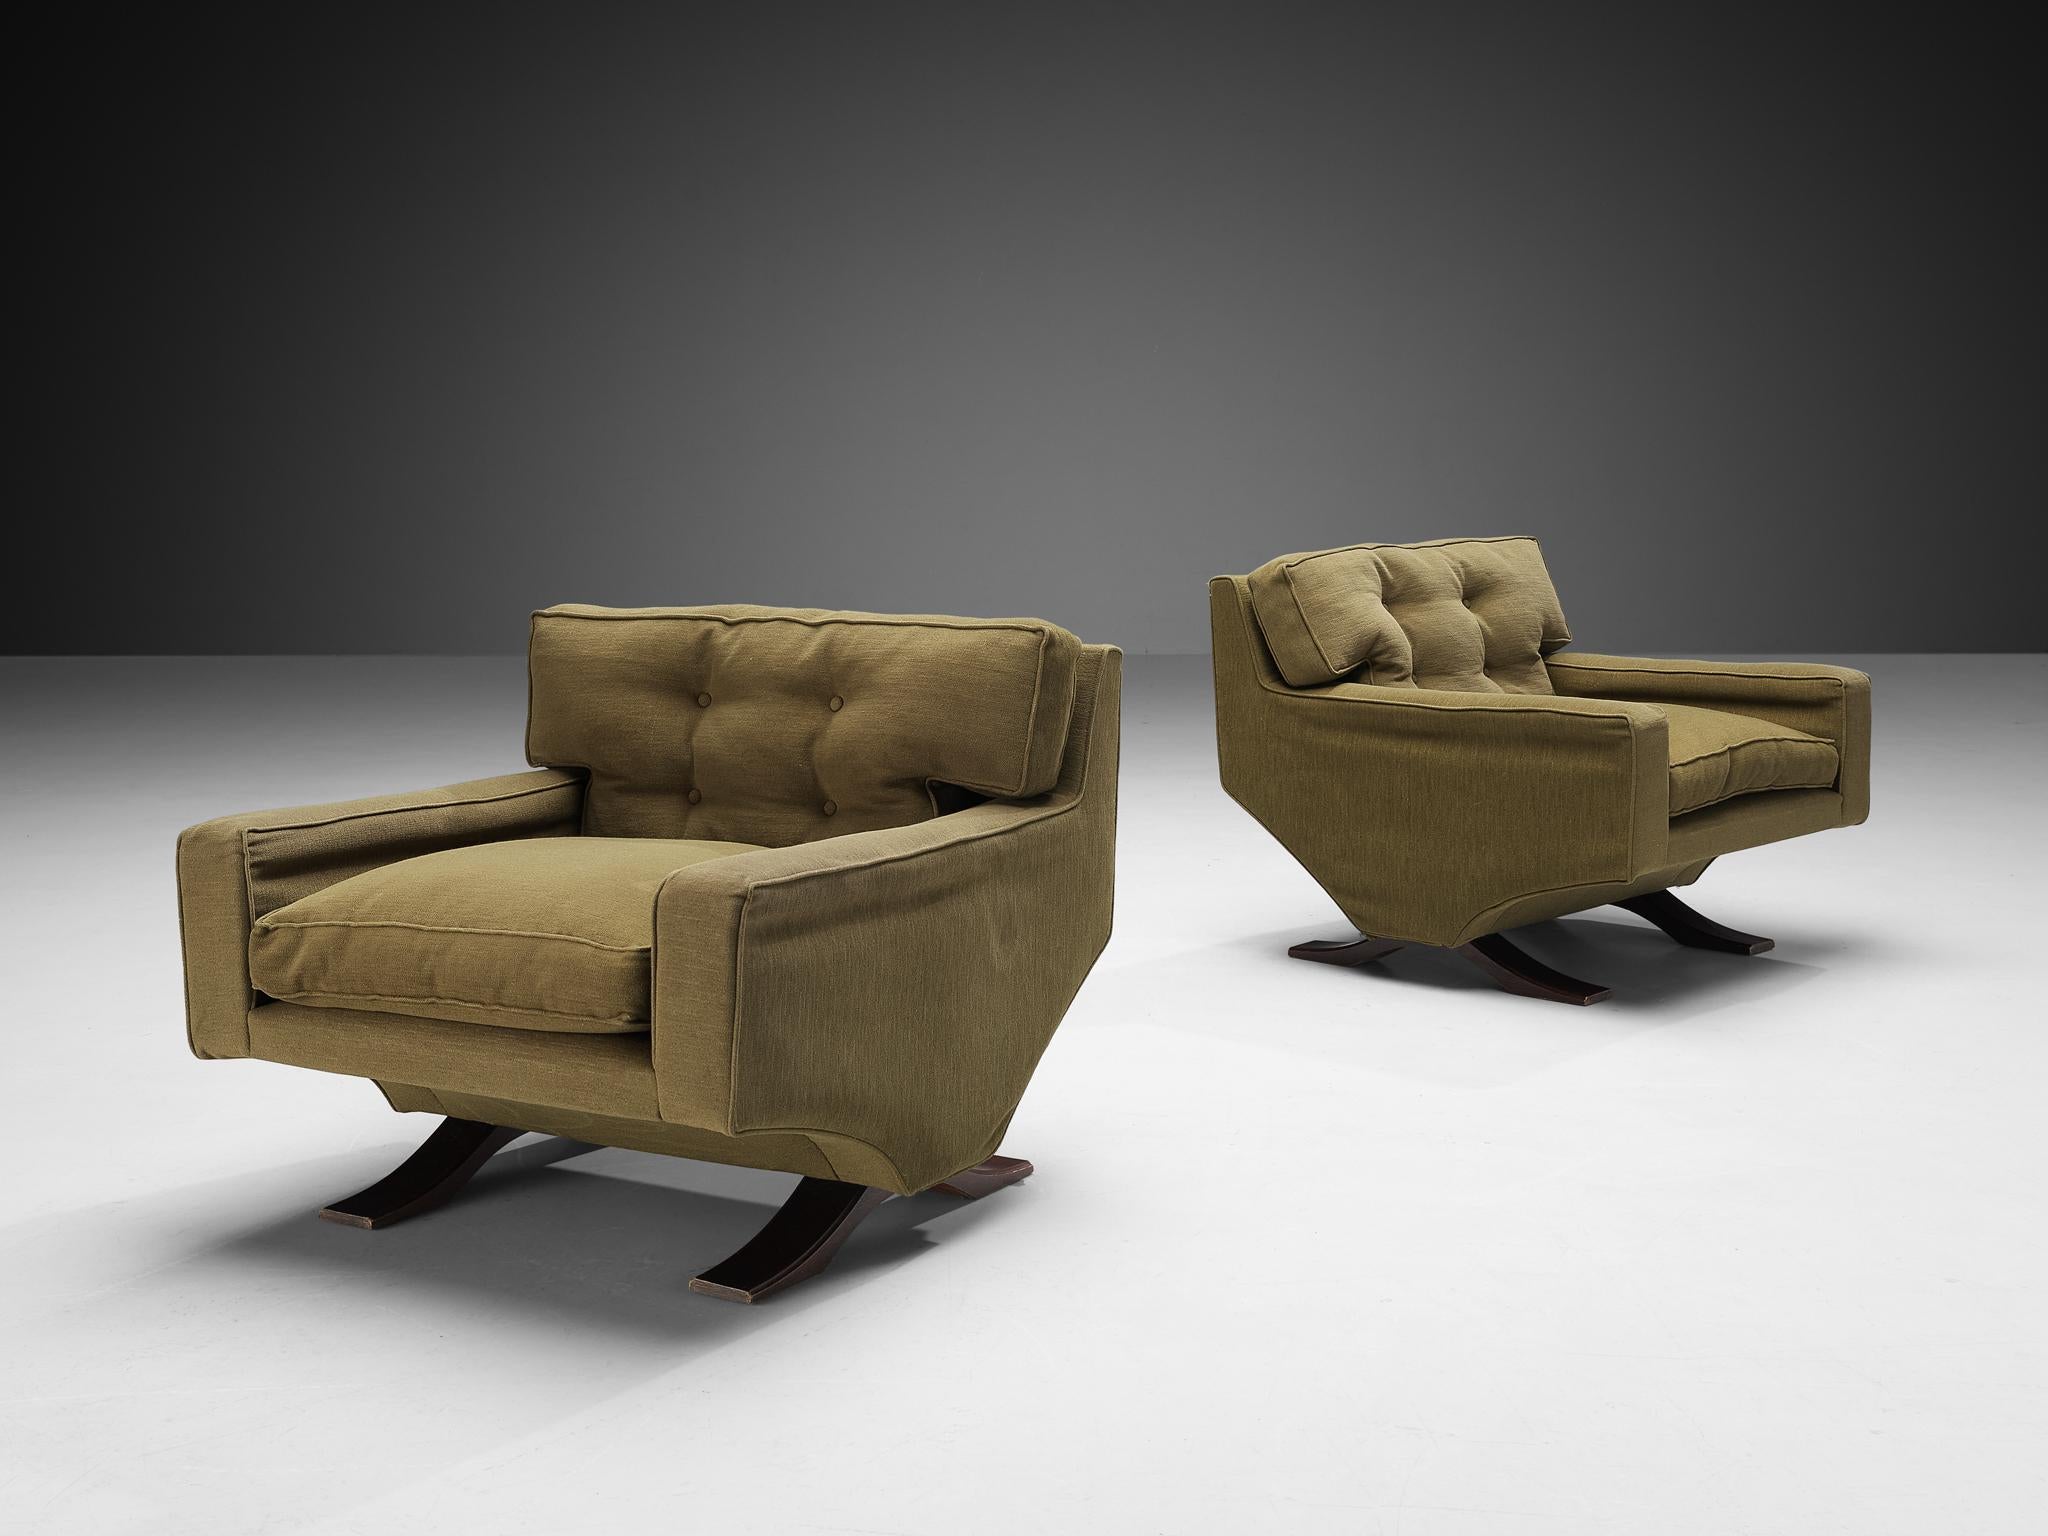 Franz Sartori for Flexform, pair of lounge chairs, beech, fabric, Italy, 1960s.

This outstanding pair of lounge chairs has an utterly well-balanced construction concealing a great sense of proportions, which reflects his work as a sculptor. The